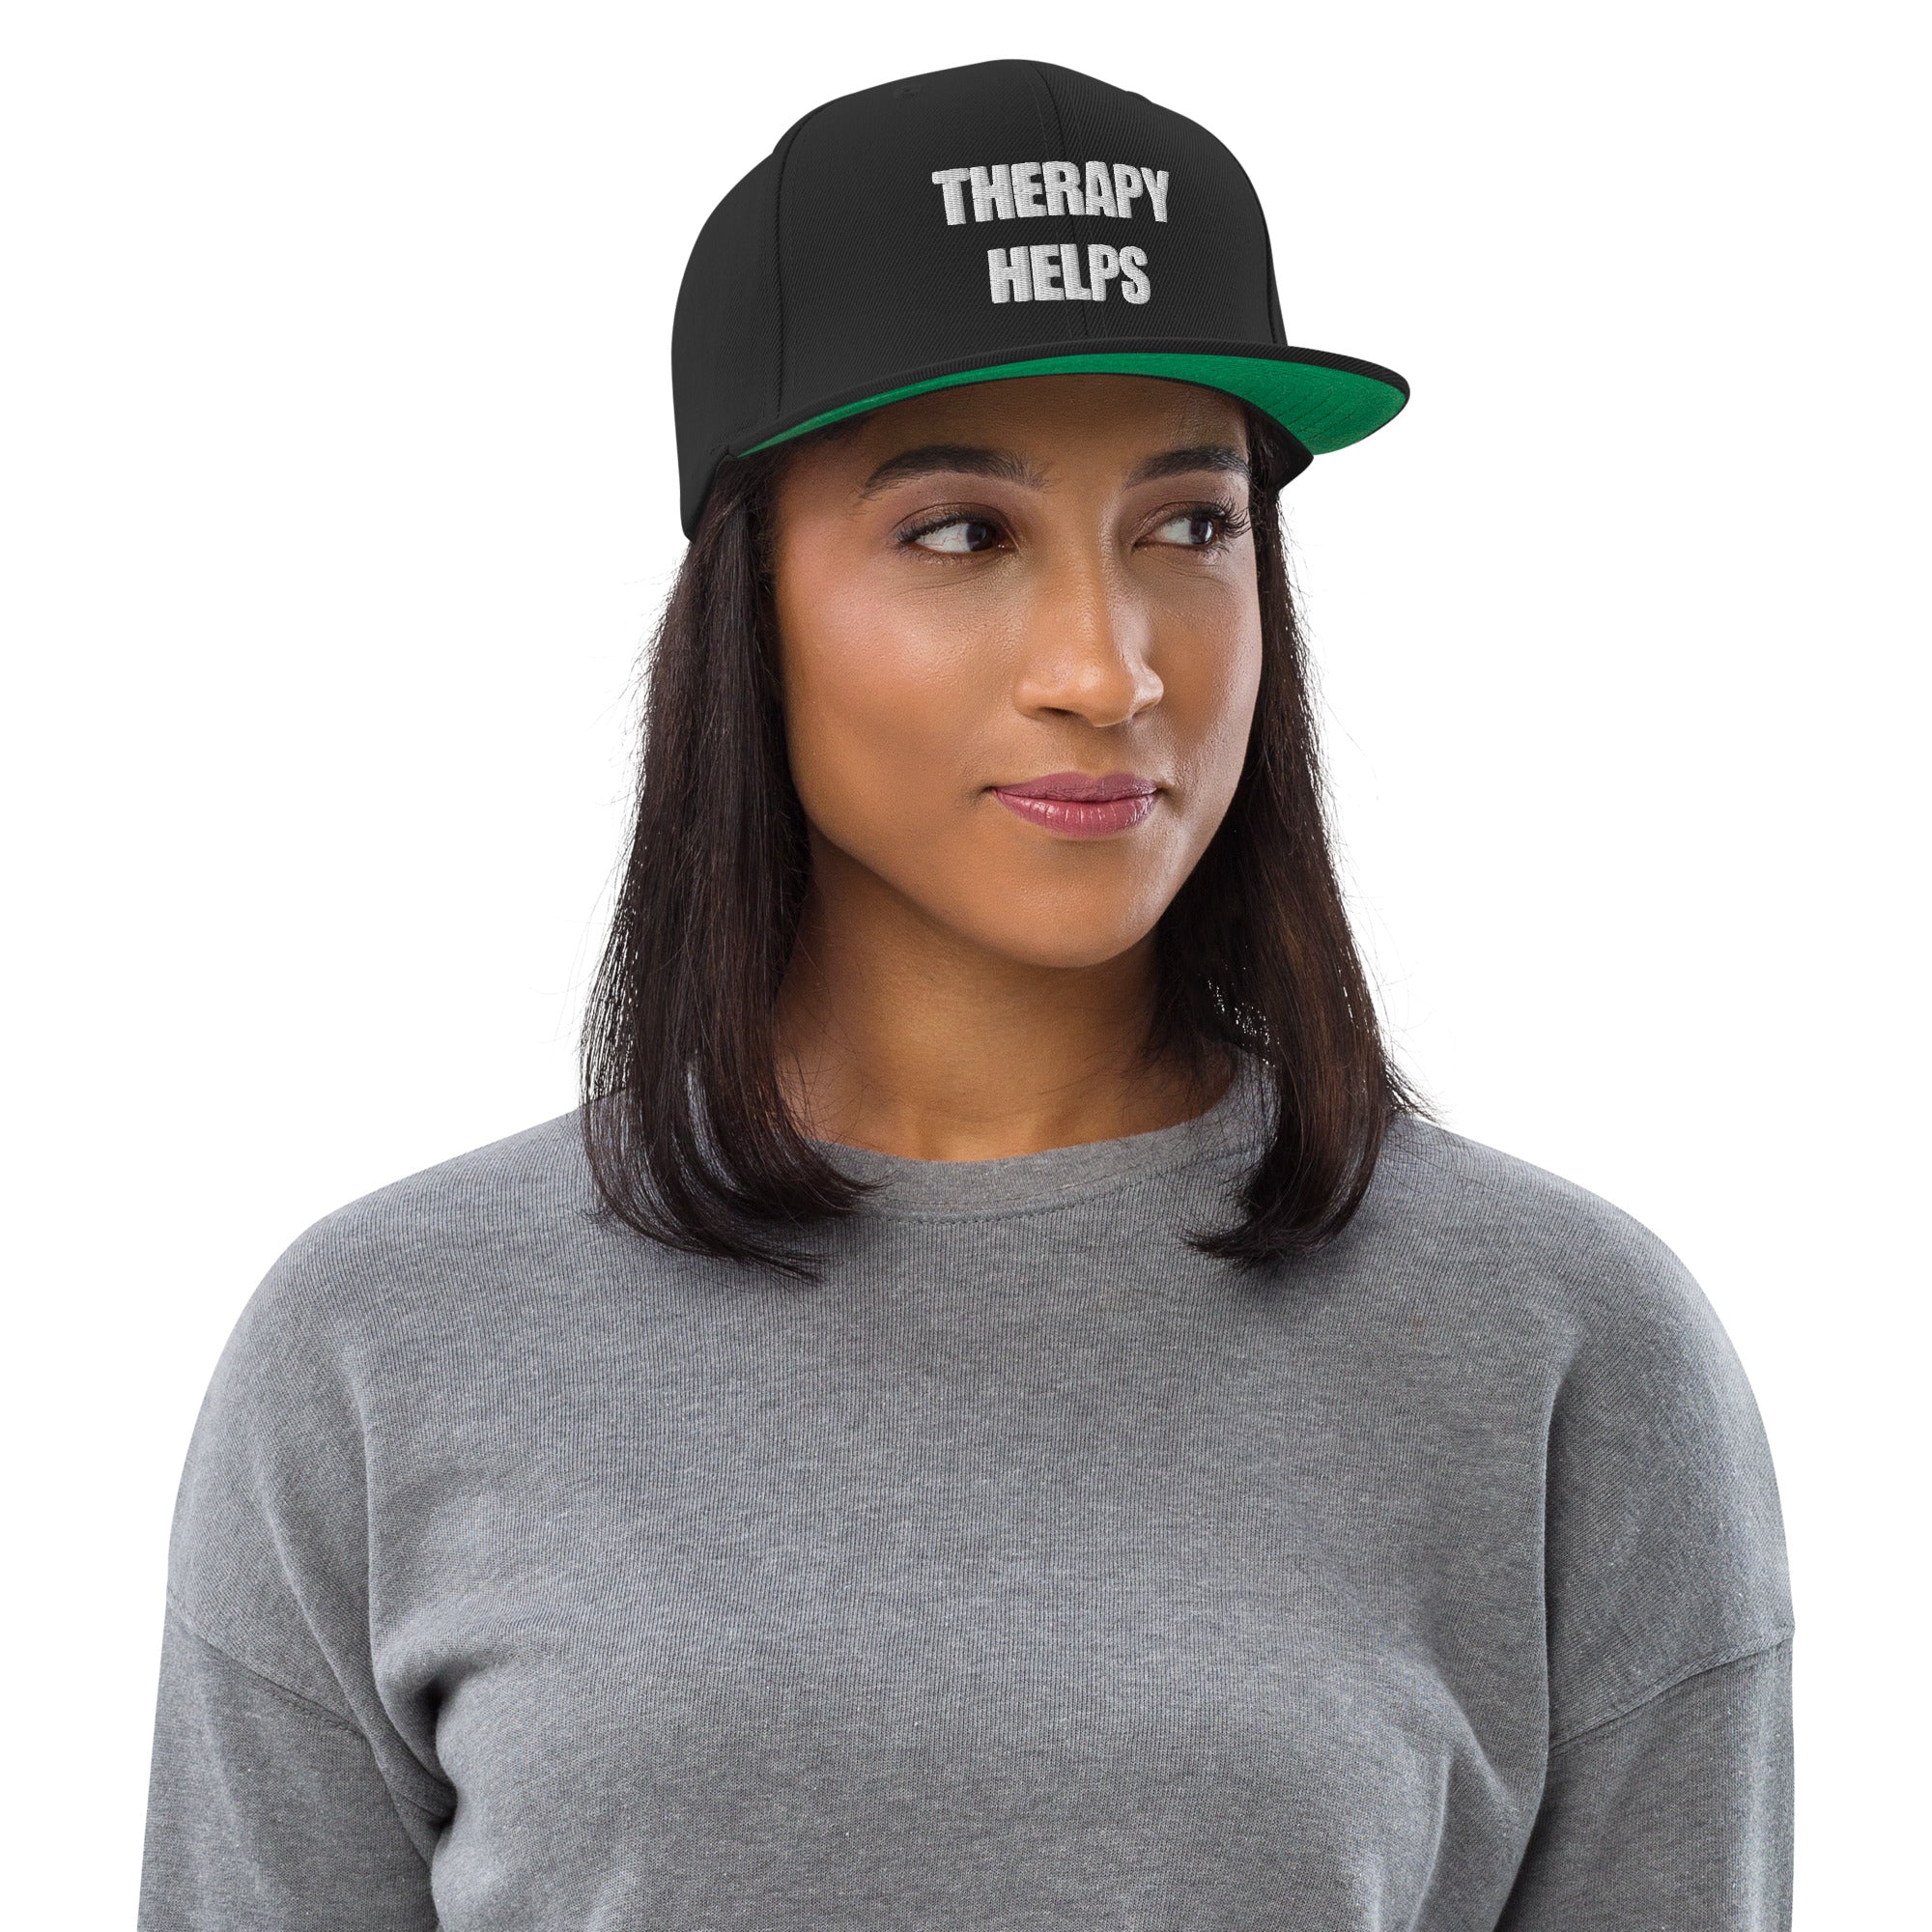 Therapy Helps Snapback Hat